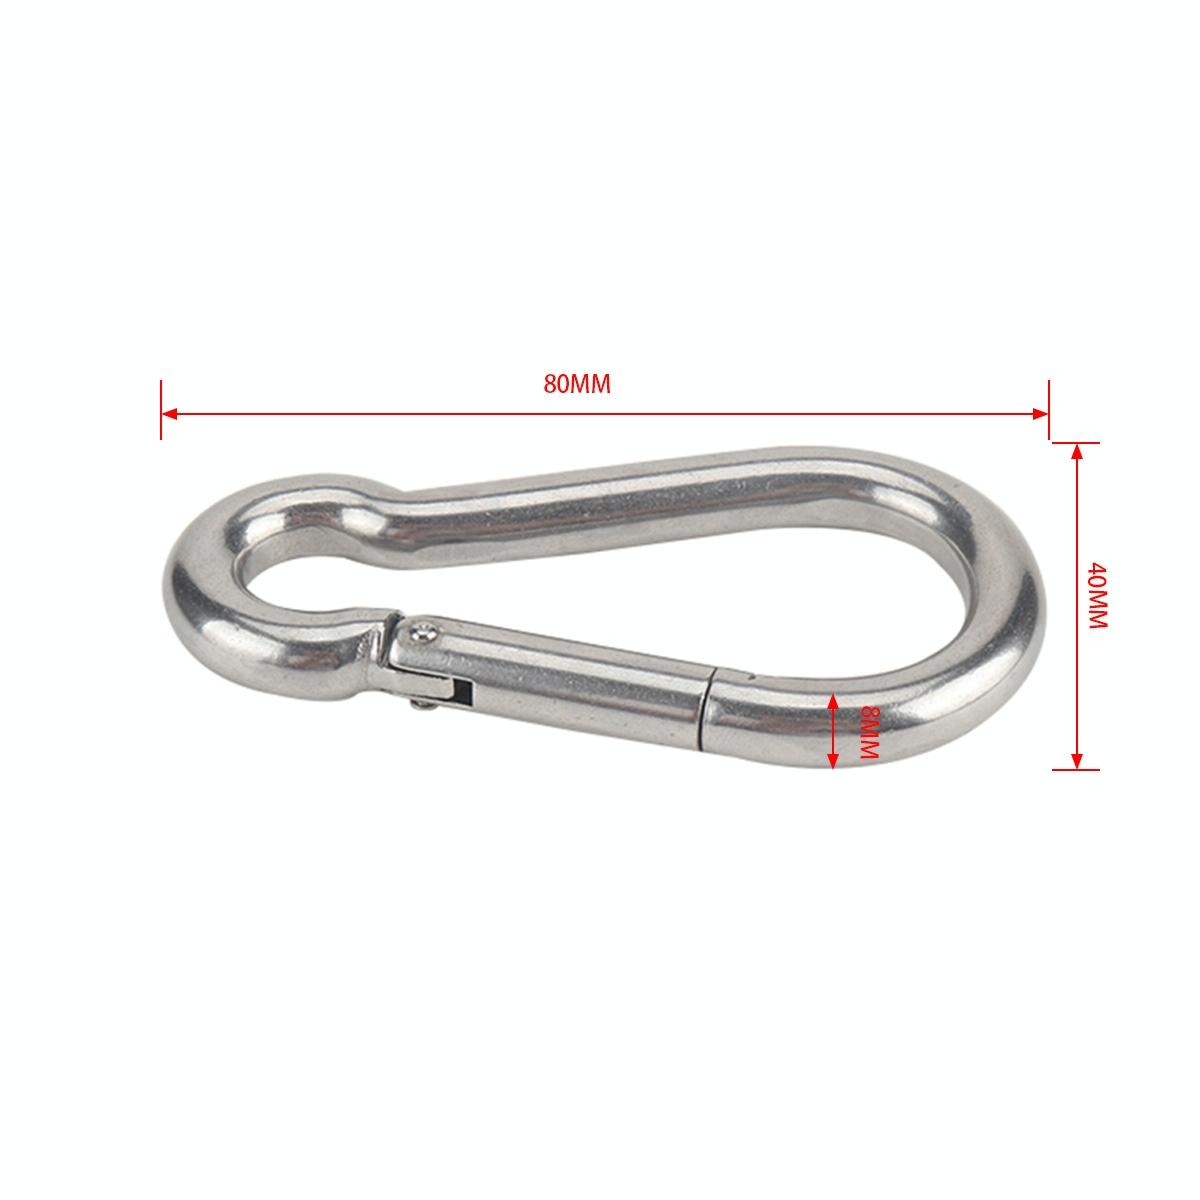 RV Trailer Spring Safety Rope Breakaway Cable, Safety Buckle Size:M8 x 80mm(Dark Grey)